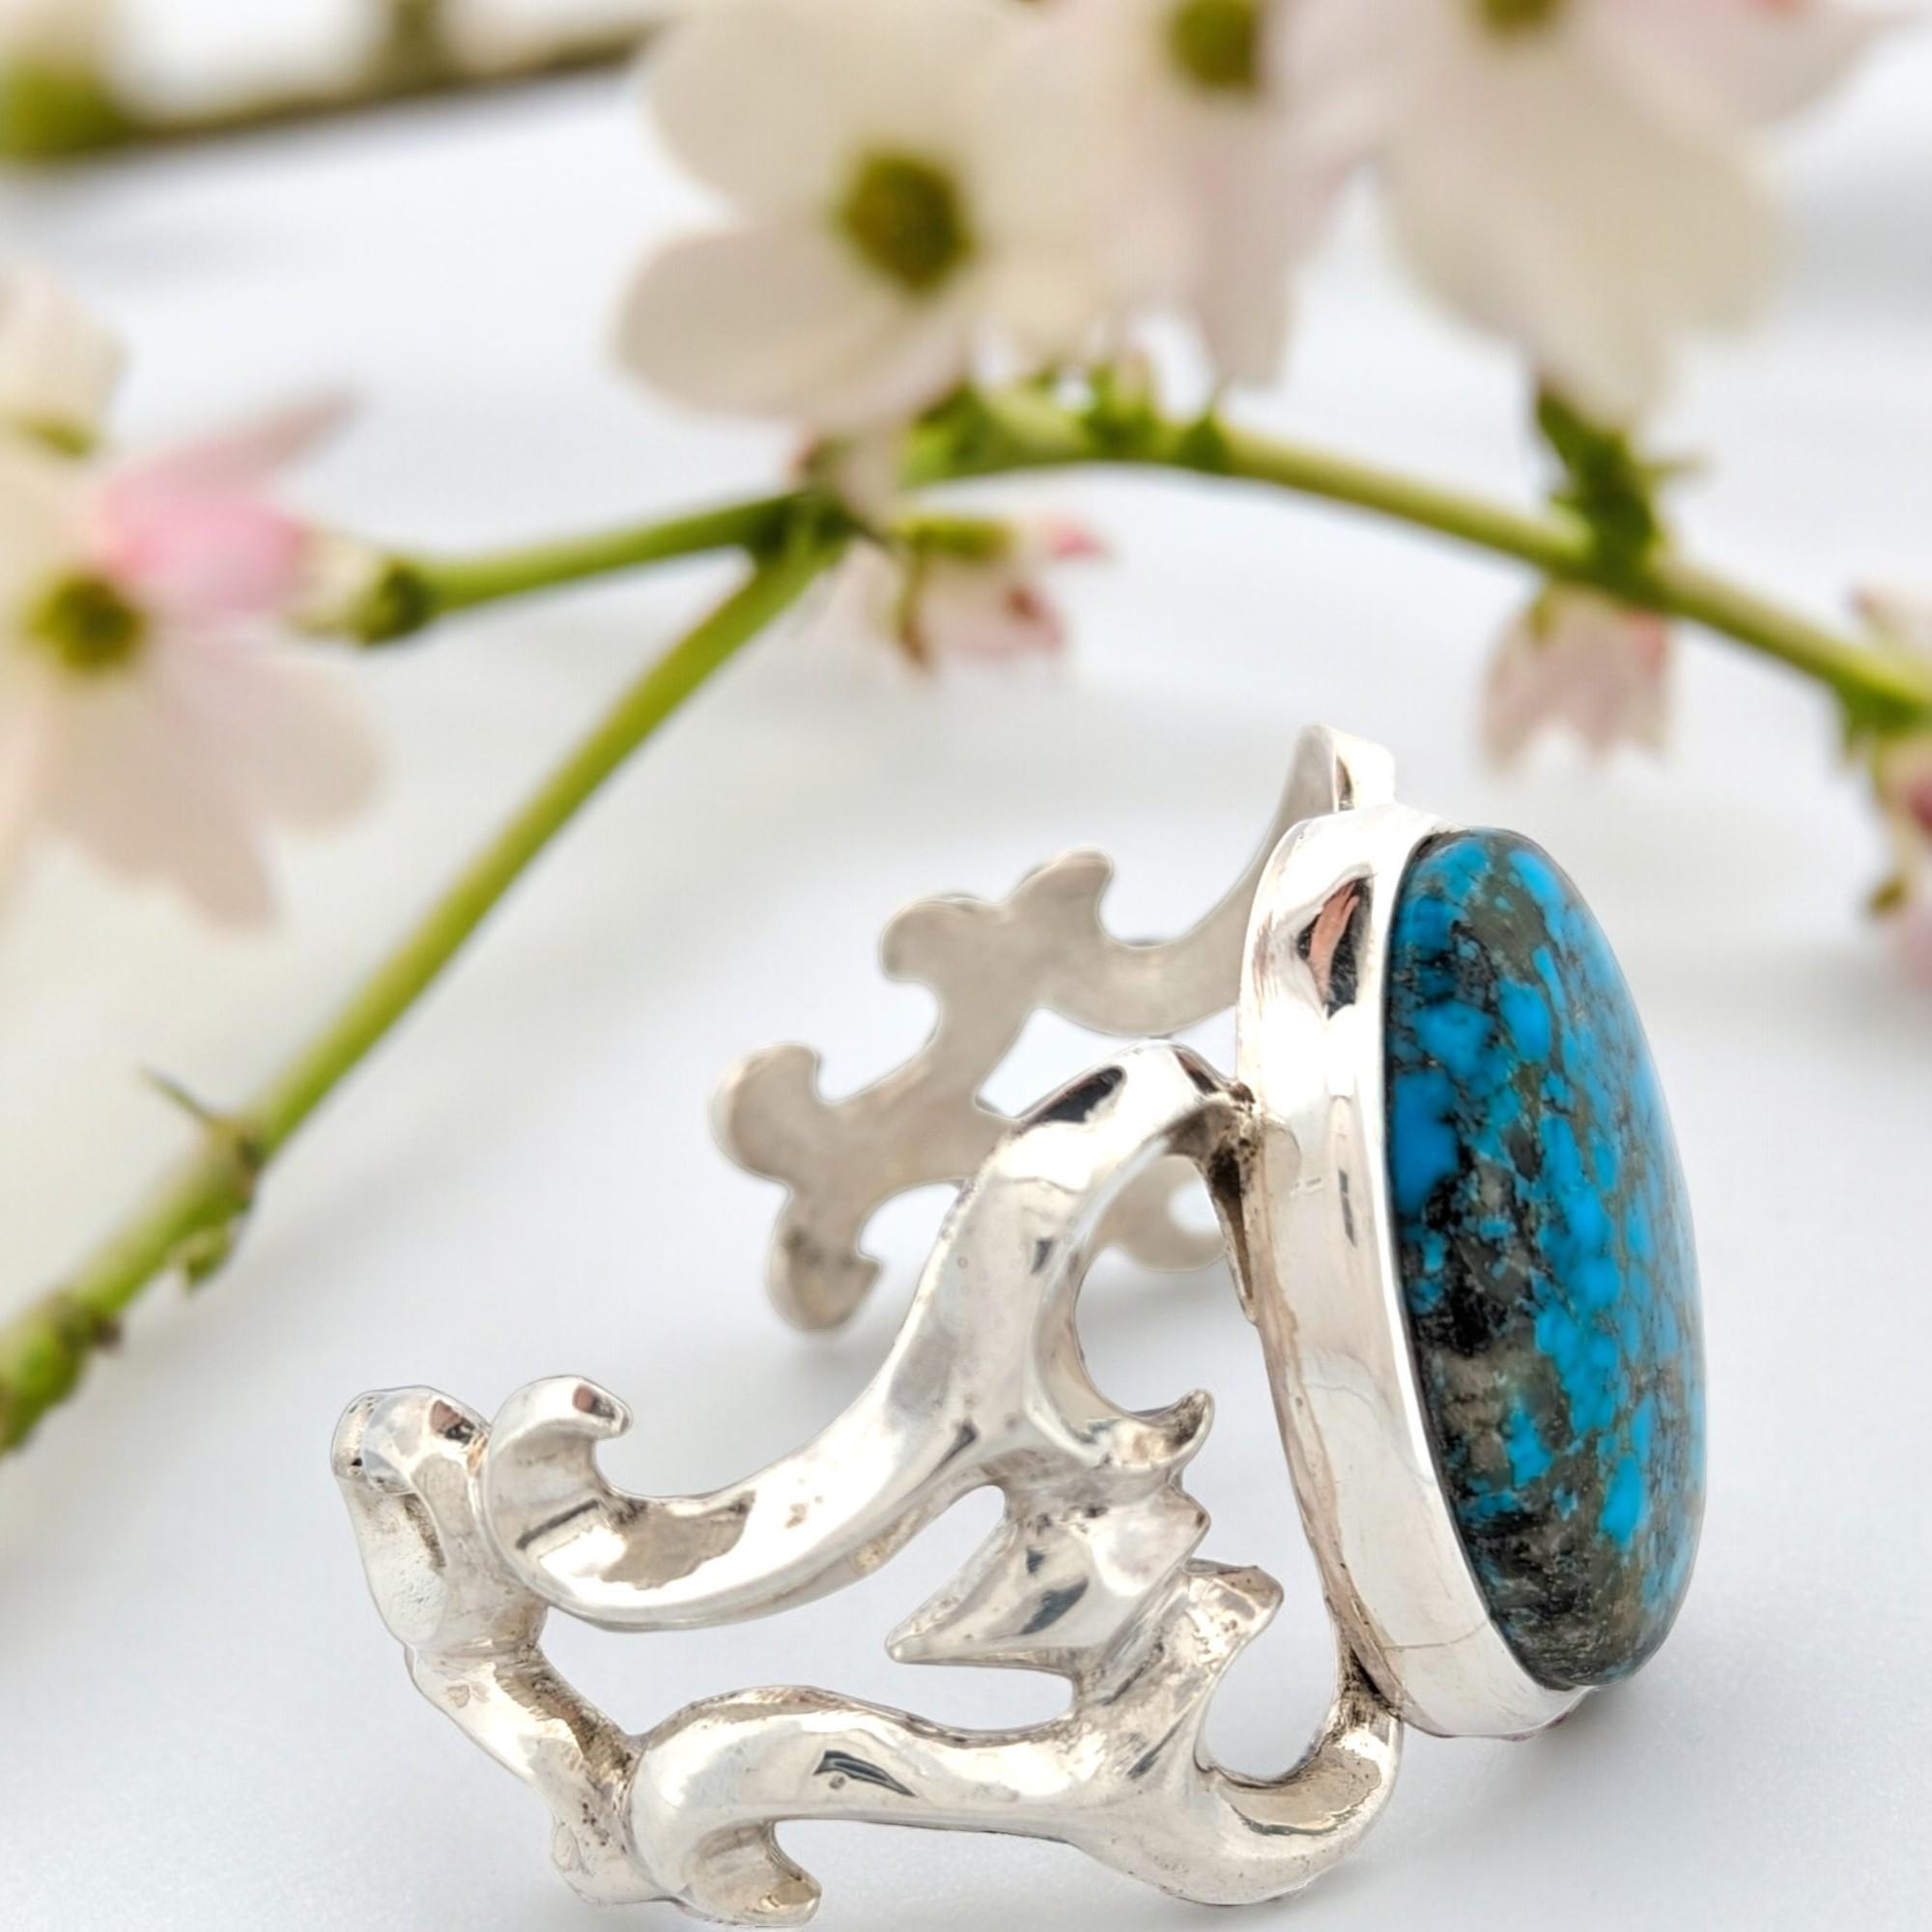 The dazzling sterling silver used to create this alluring cuff bracelet captures the essence of the Southwest and has a timeless appeal. The magnificent Kingman turquoise gemstone, which is well-known for its alluring hues and elaborate patterns, is